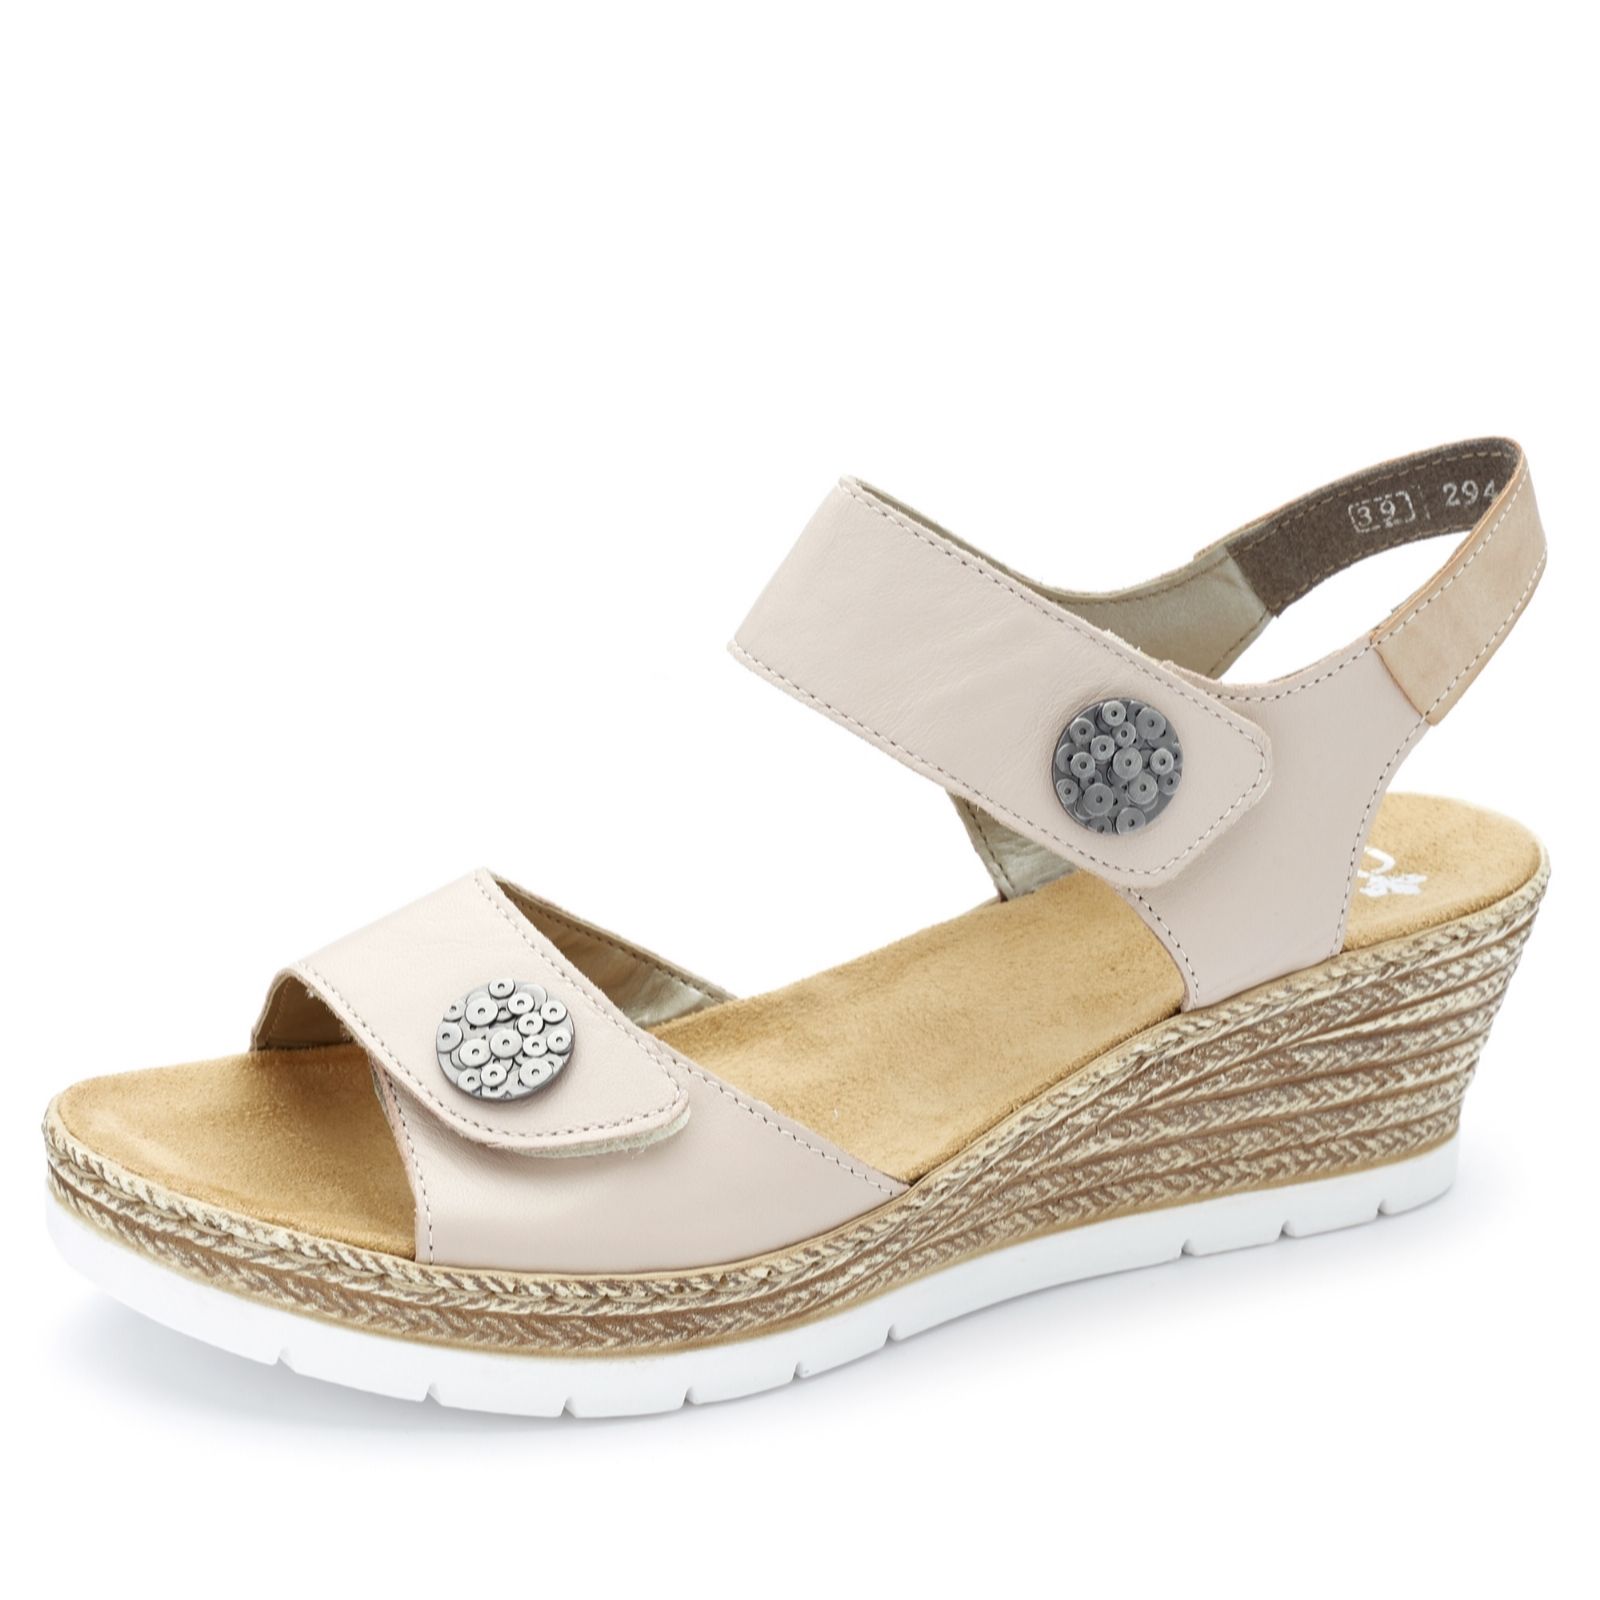 Rieker Wedge Sandal with Button Detail - QVC UK